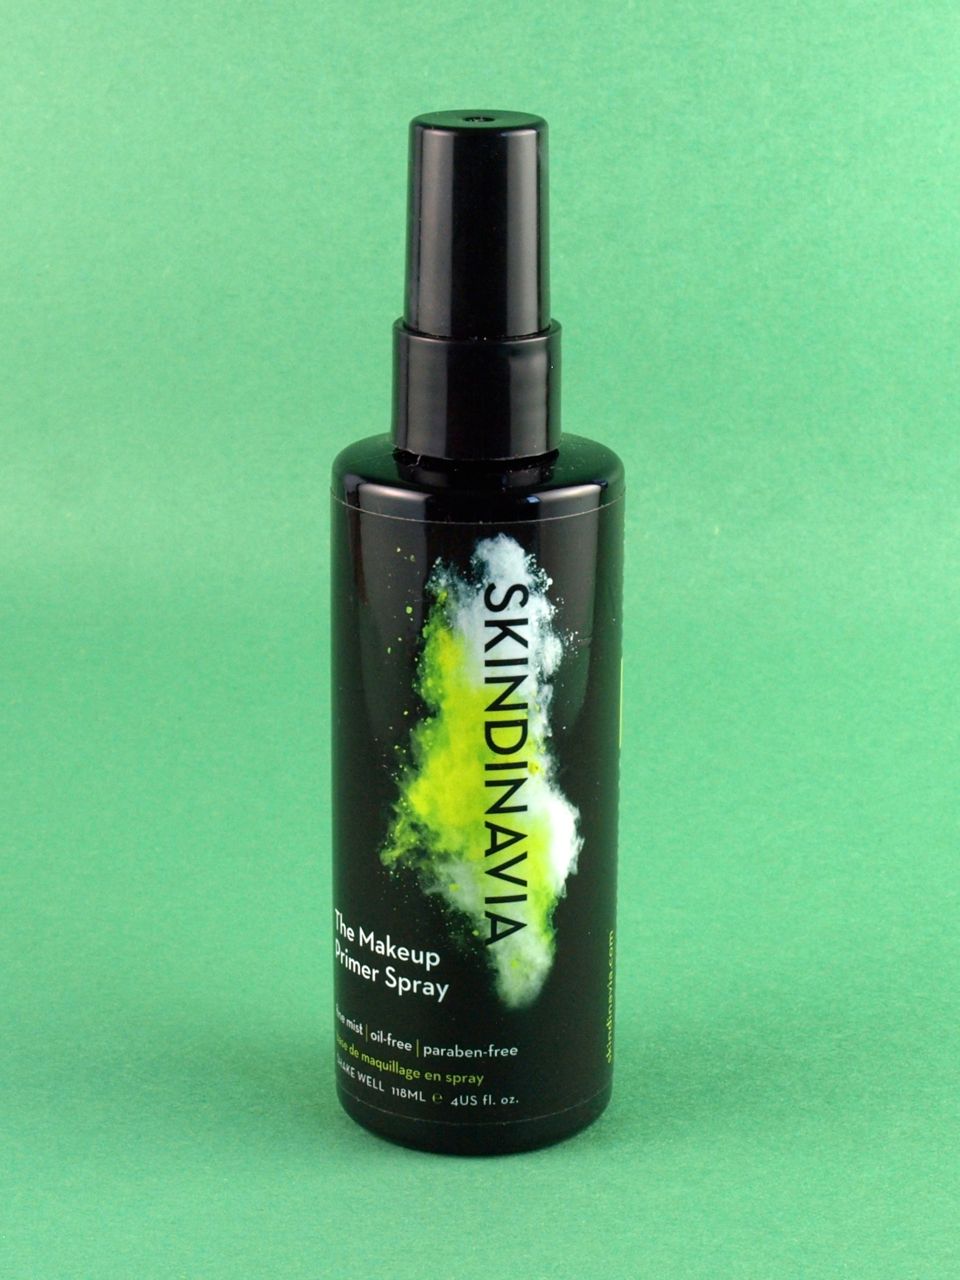 Skindinavia The Makeup Primer Review | The Happy Sloths: Beauty, and Blog with Reviews and Swatches